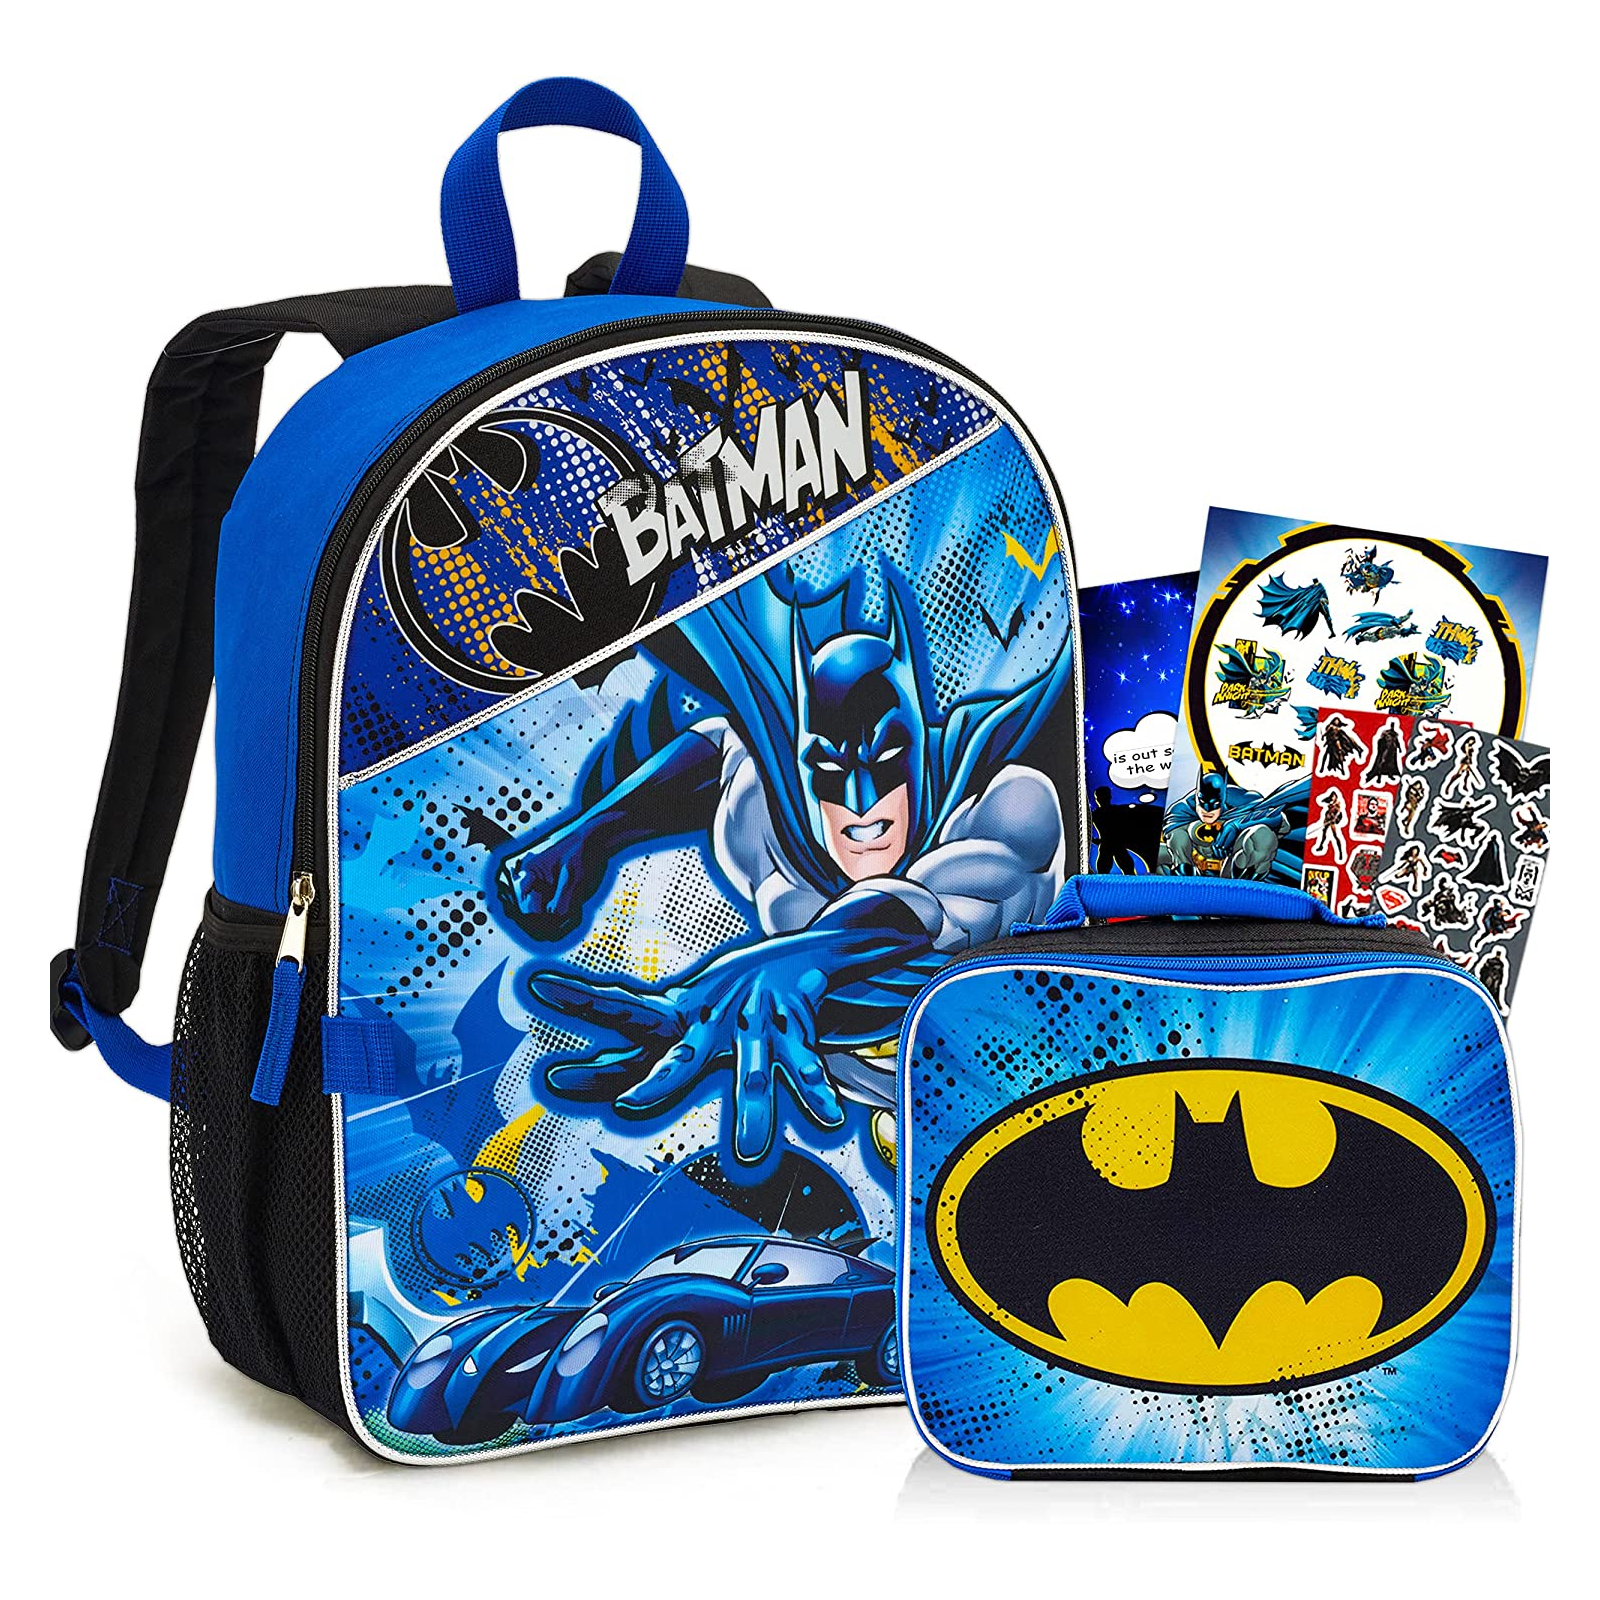 Batman Backpack with Lunchbox Set Front View